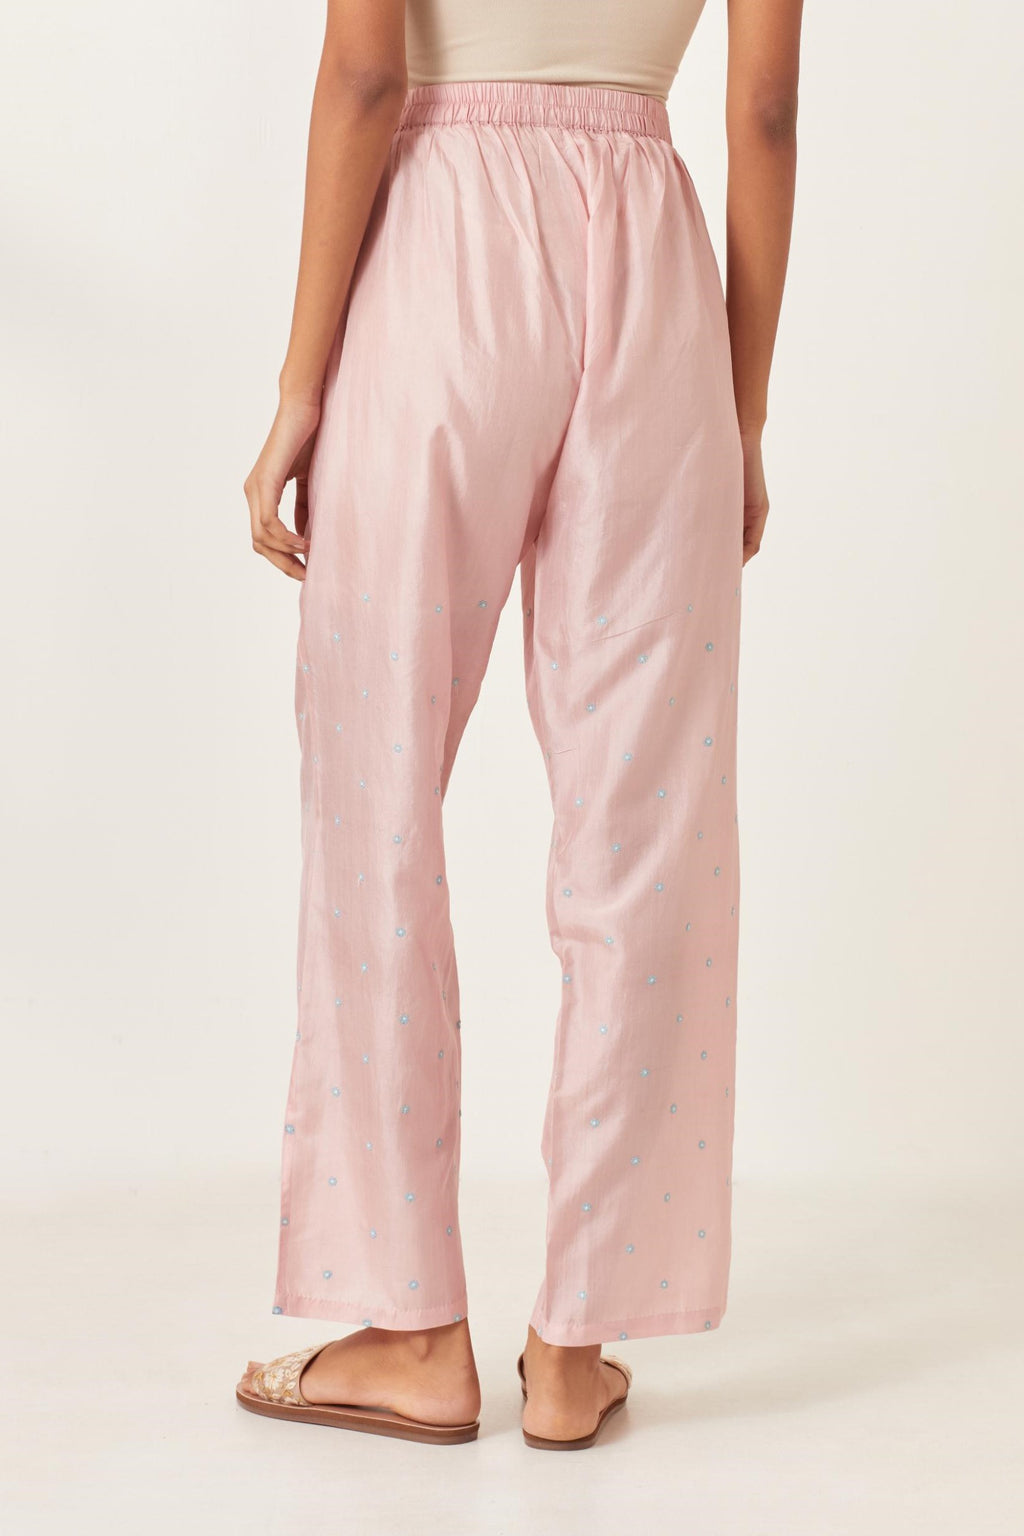 Pink silk straight pants detailed with small flower embroidery at bottom.